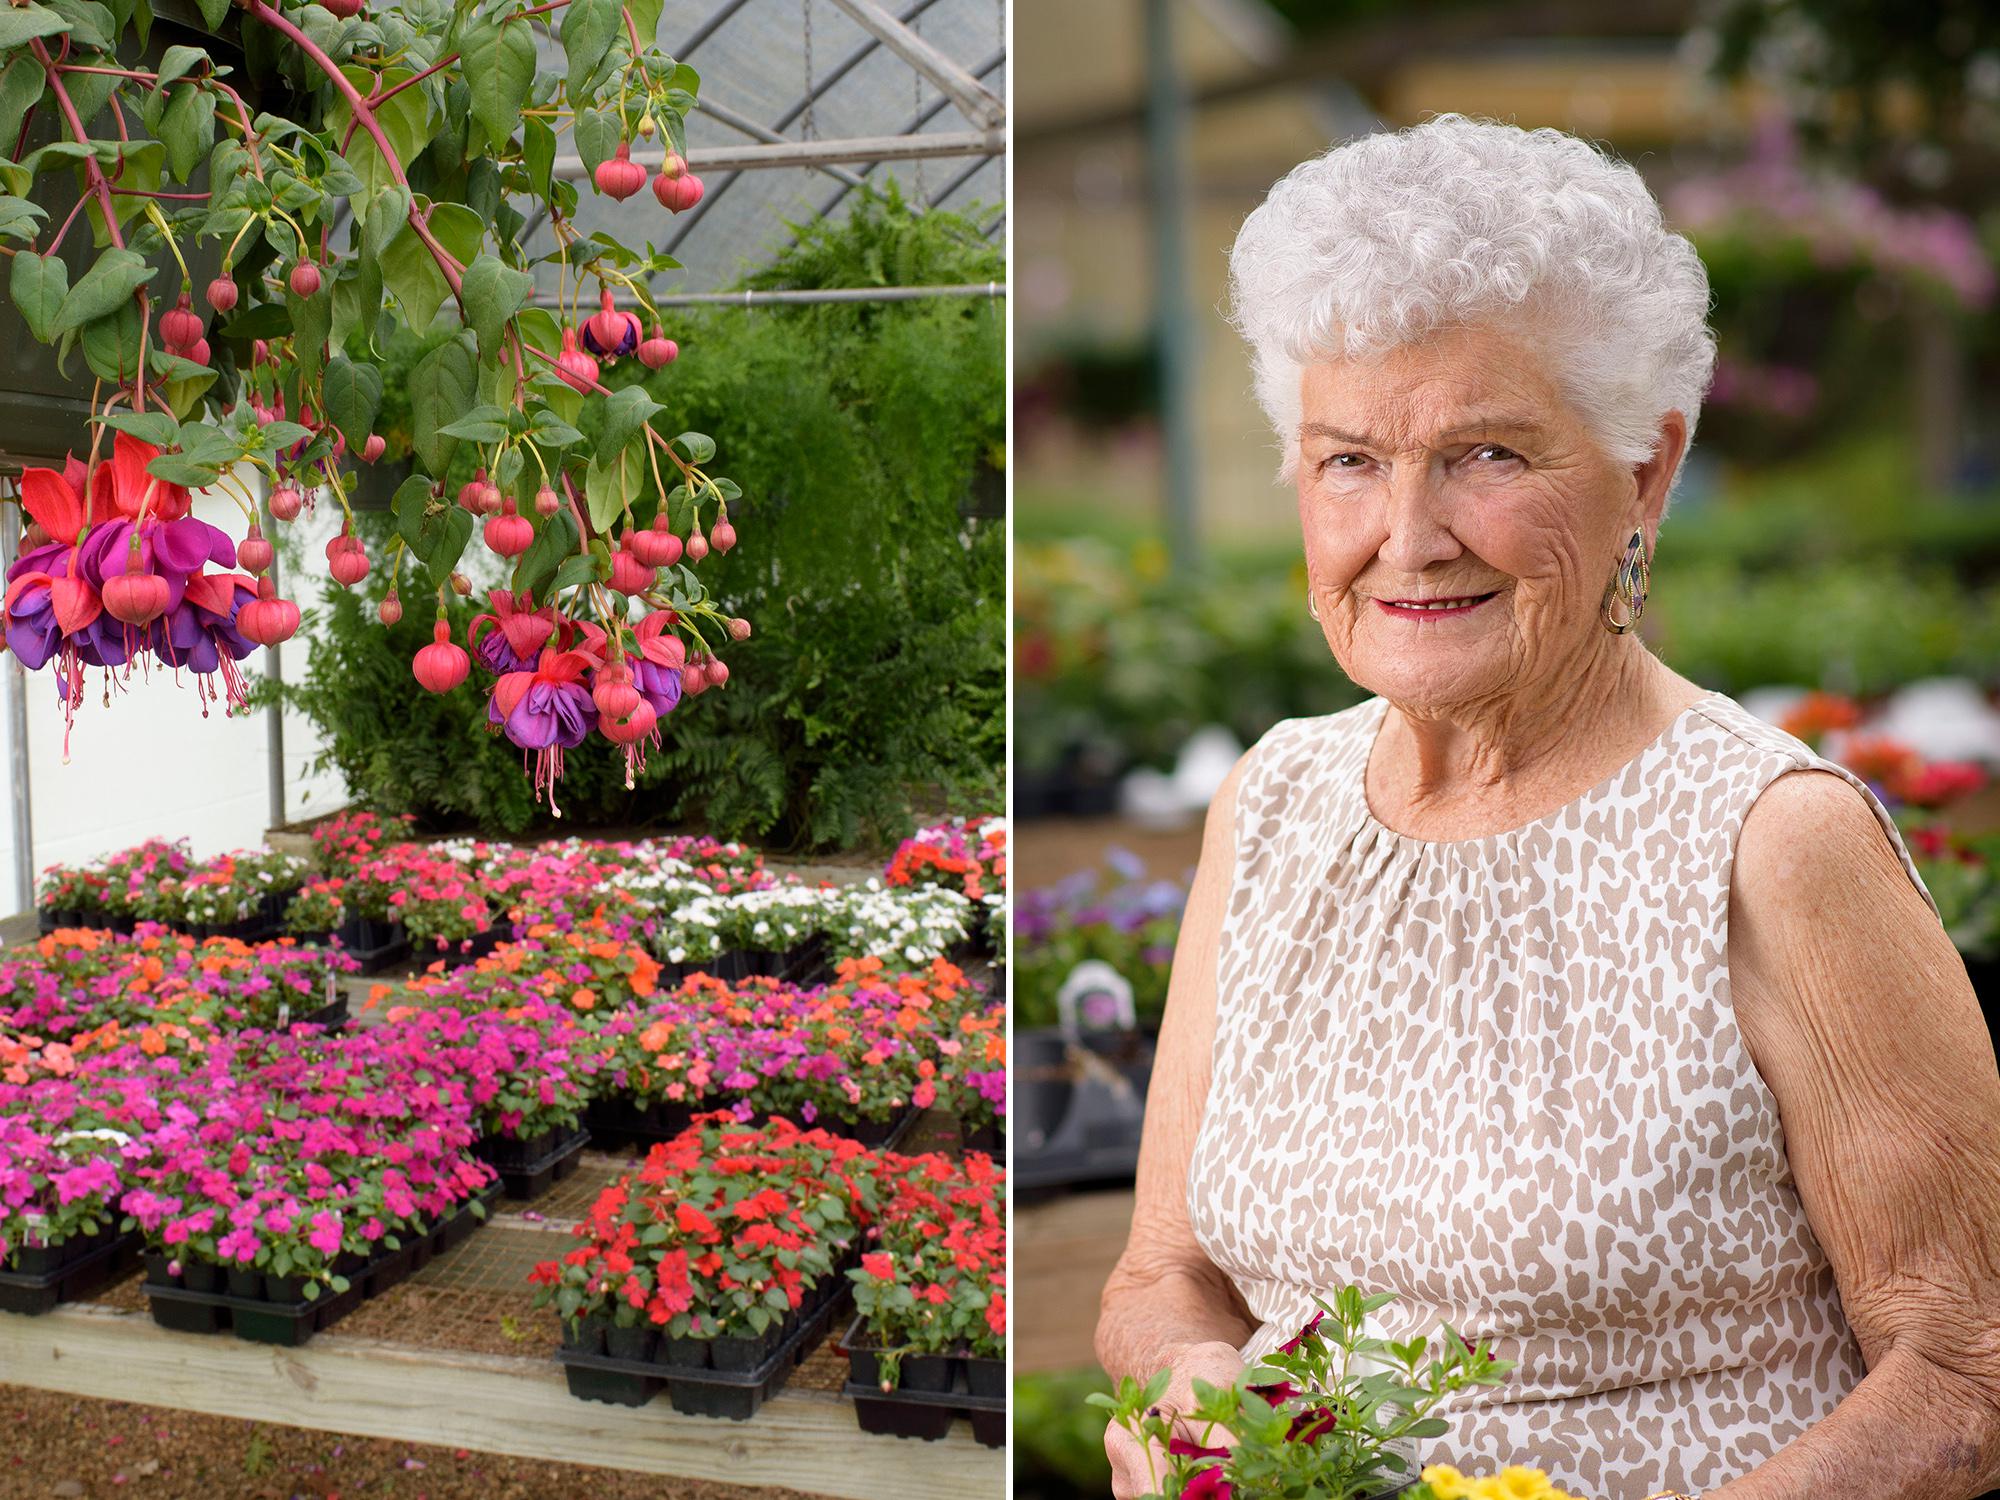 Customers still can find unusual items such as this fuchsia plant (left photo), at The Flower Center in Vicksburg. Bobbie Beard (right), former owner, began the successful horticulture business in her backyard 30 years ago. Her son and daughter-in-law now own the nursery. (Photos by MSU Extension Service/Kevin Hudson)